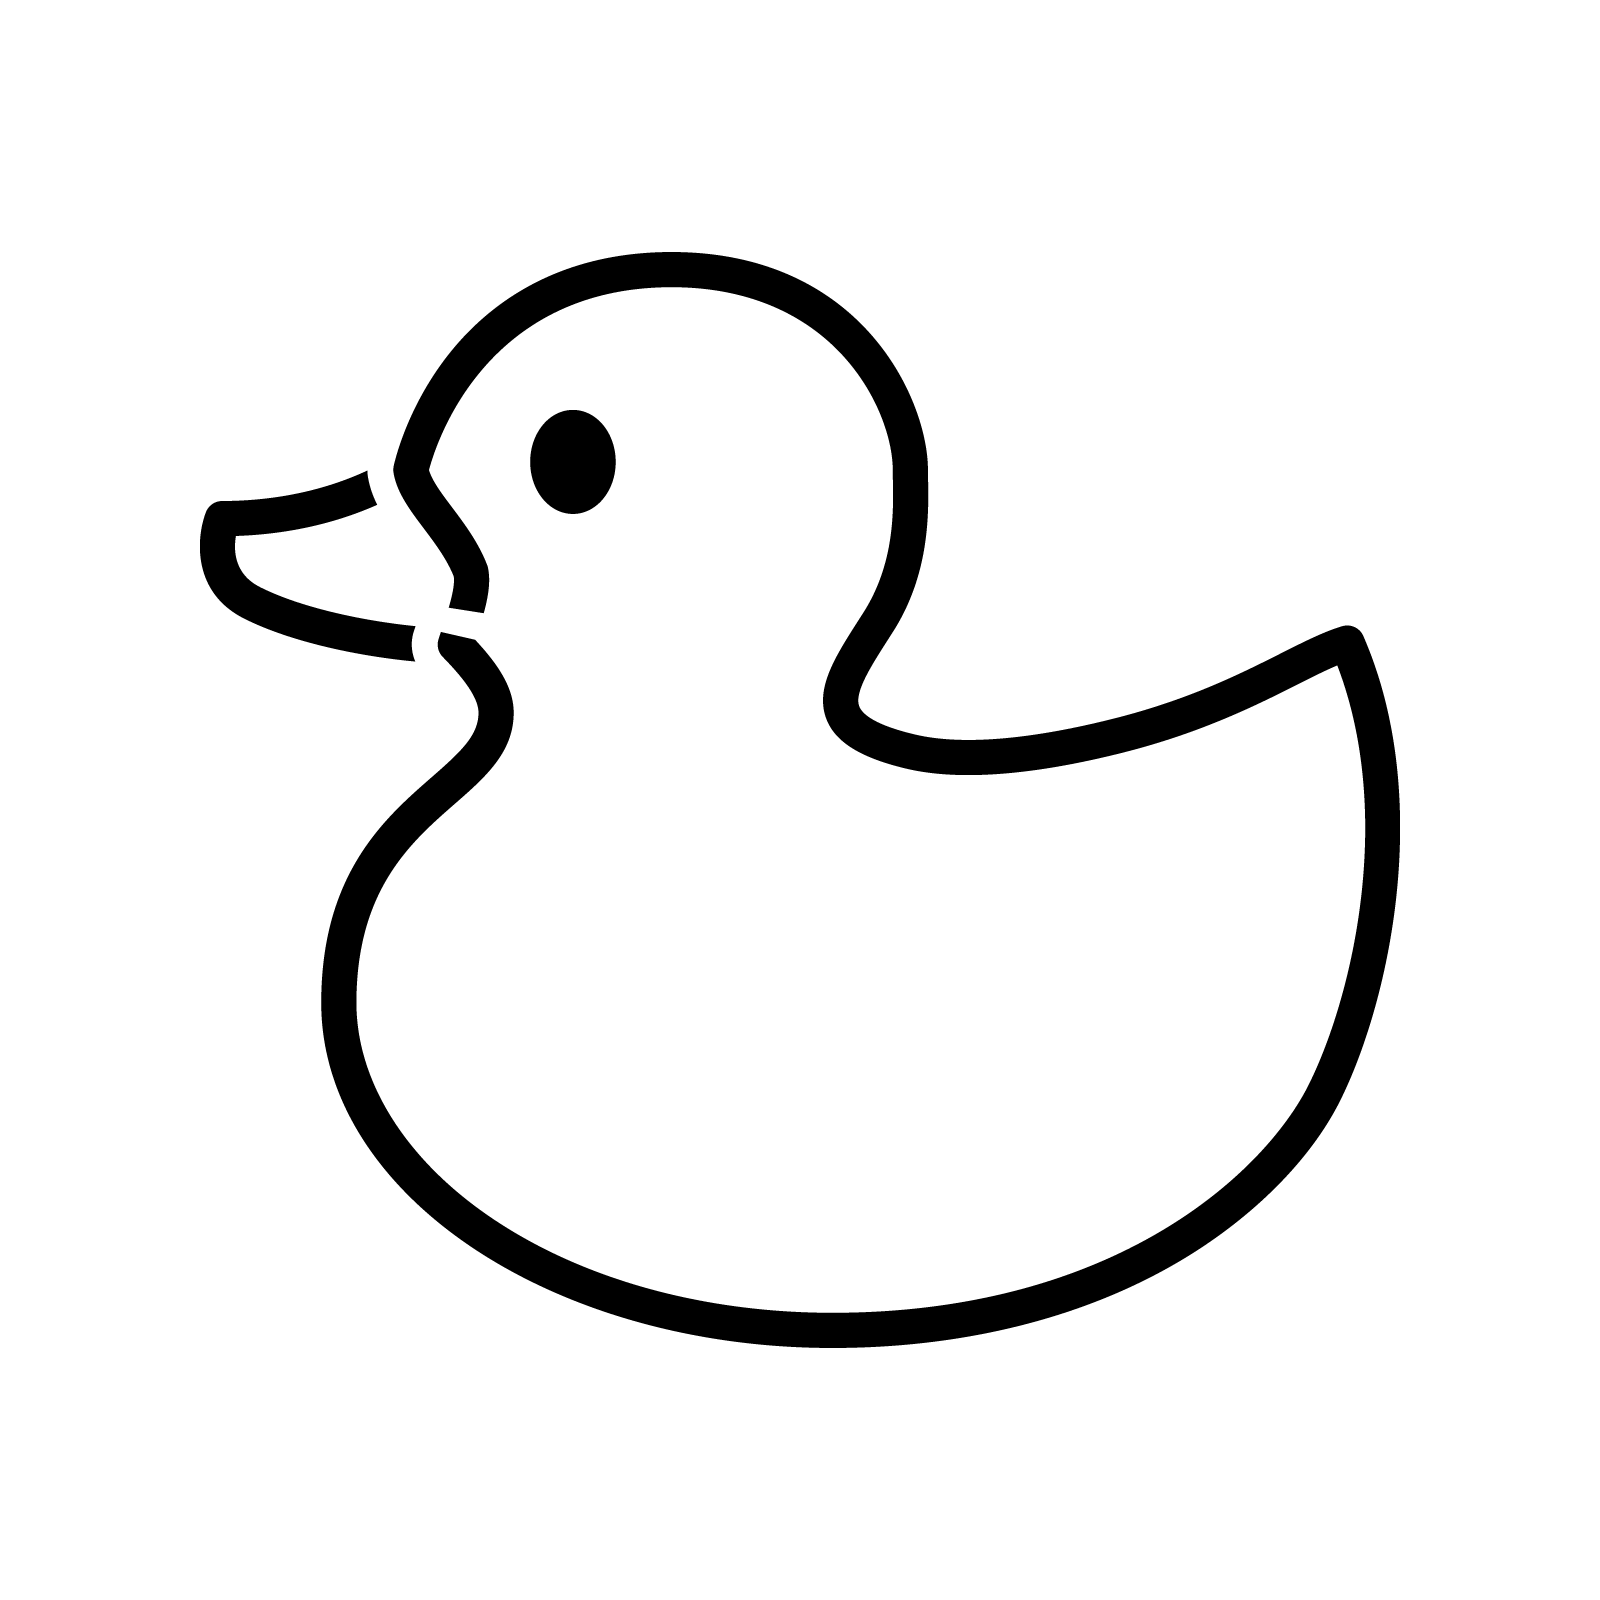 The best free Duck silhouette images Download from 990 free